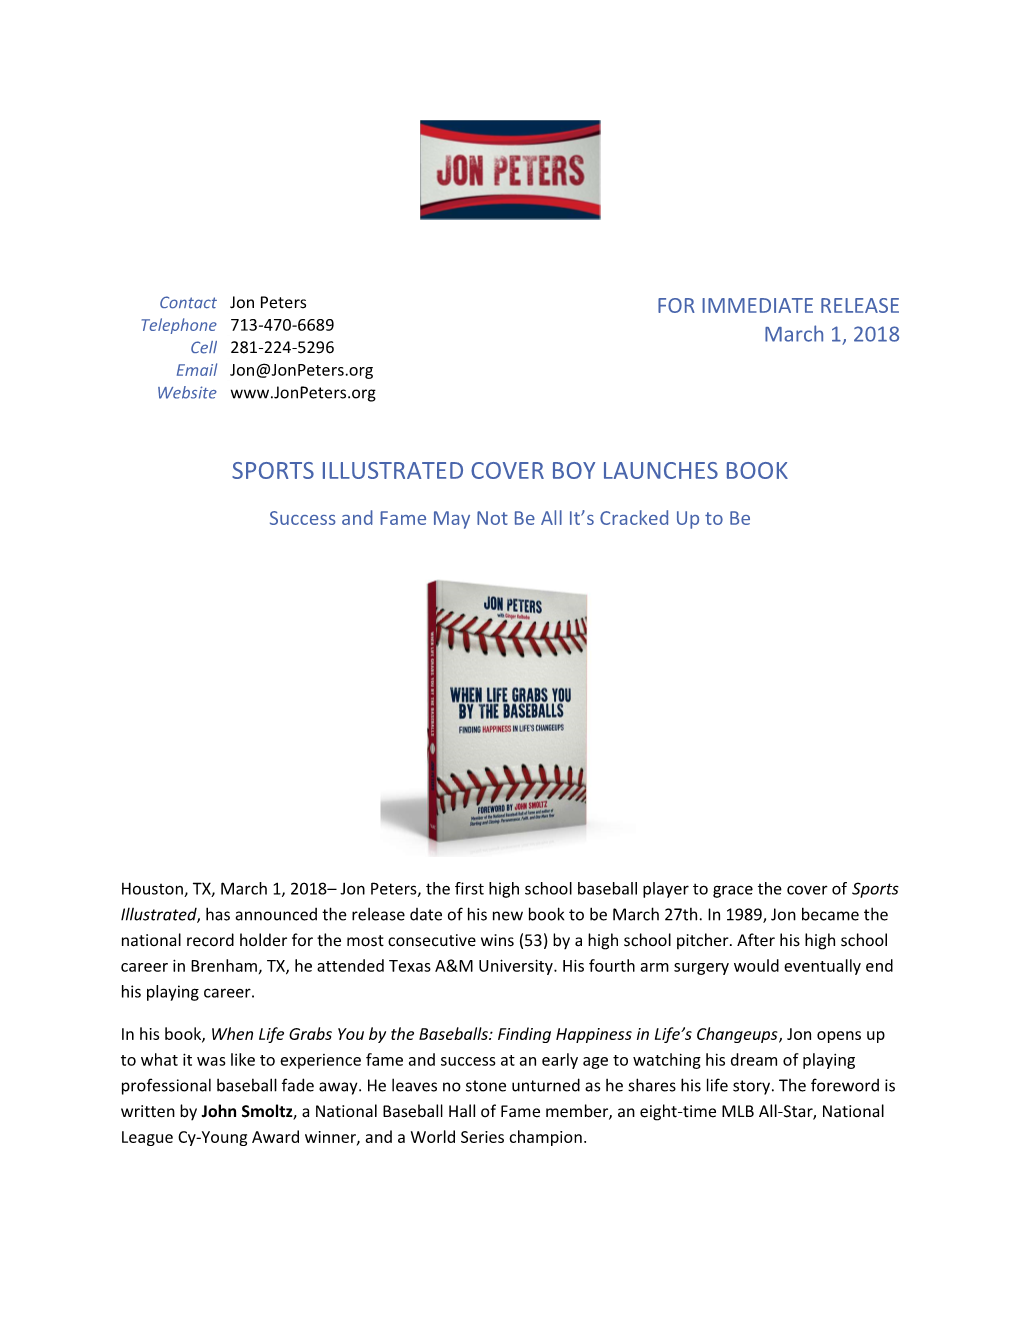 Sports Illustrated Cover Boy Launches Book